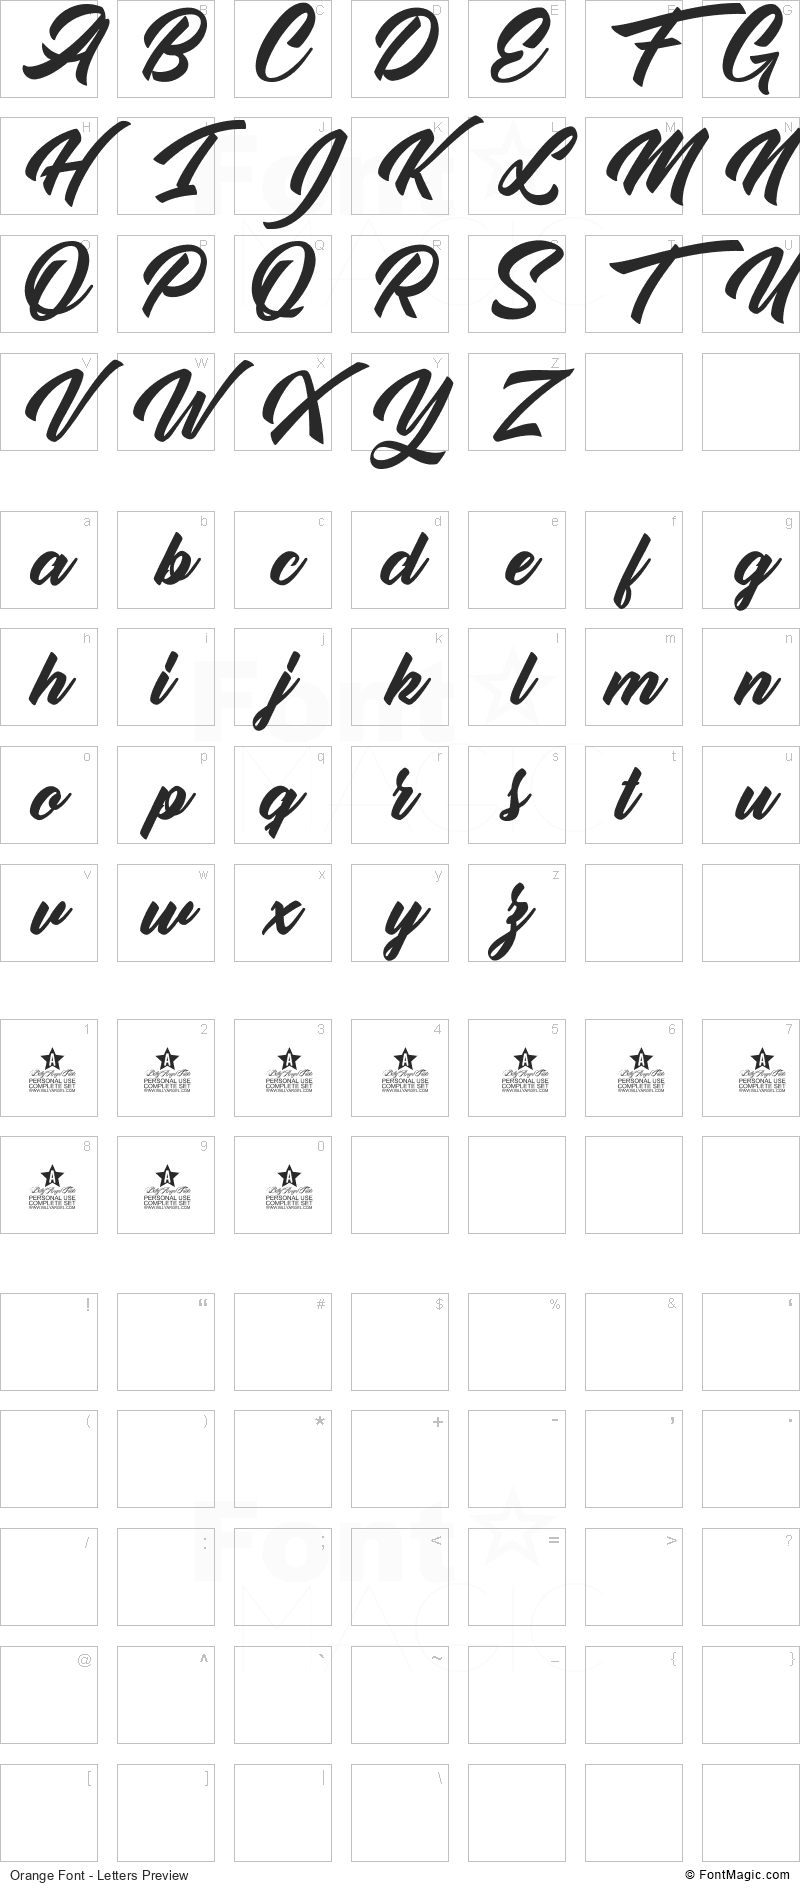 Orange Font - All Latters Preview Chart